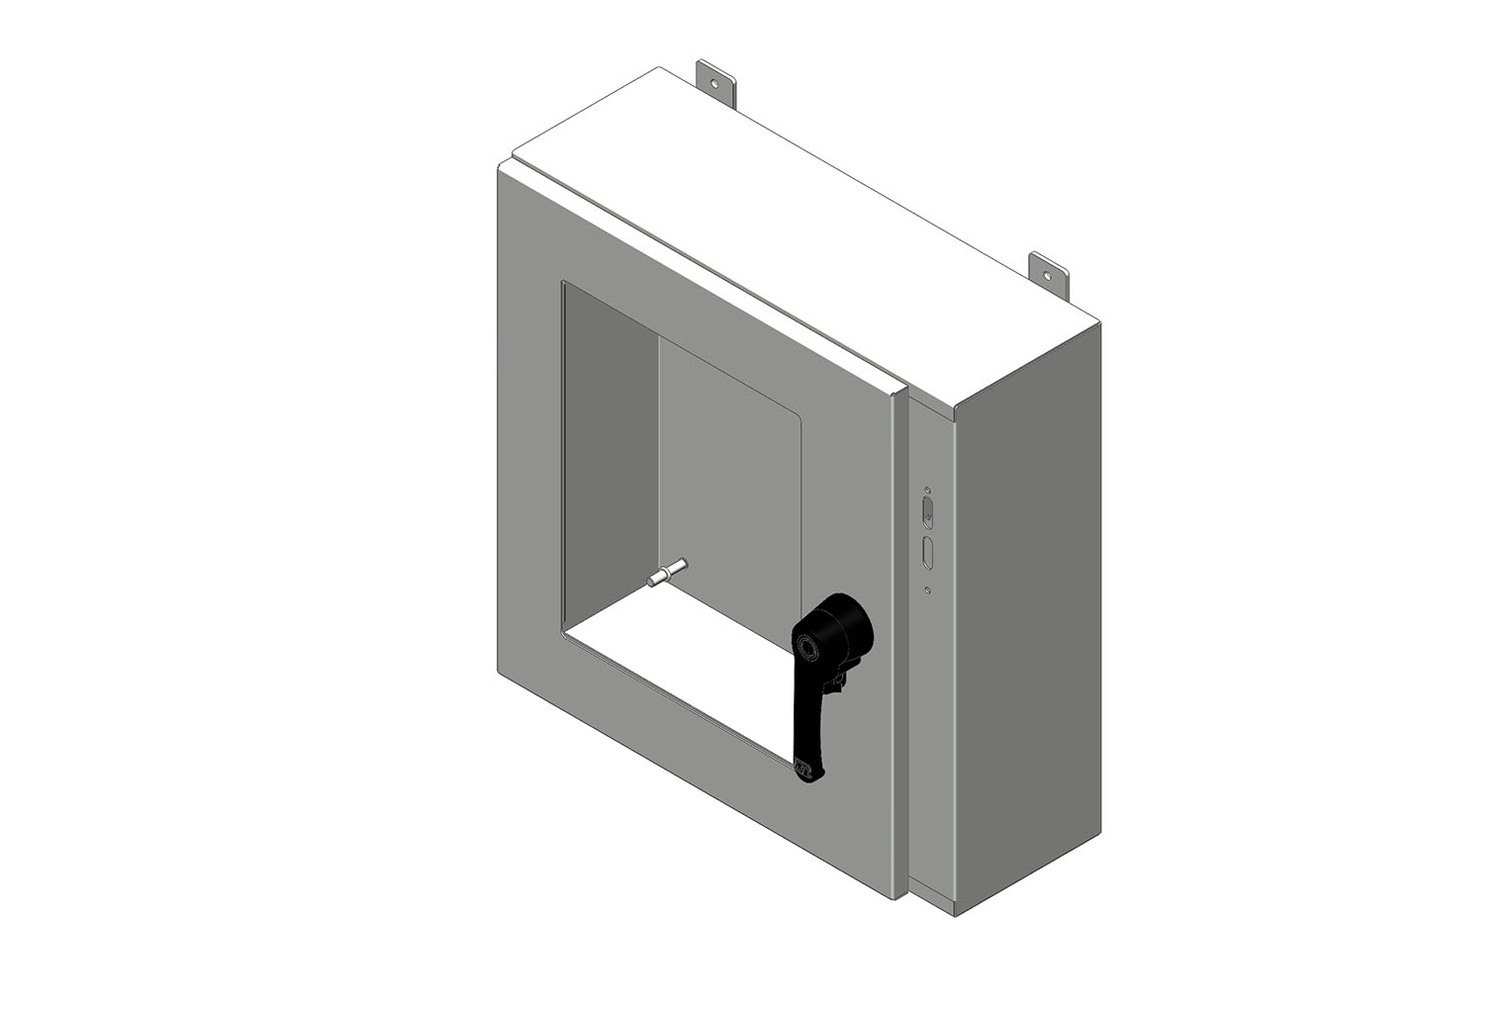 RMR Standard Wall-Mount Disconnect Enclosure, Type 4, with Solid Single Door - Image 10